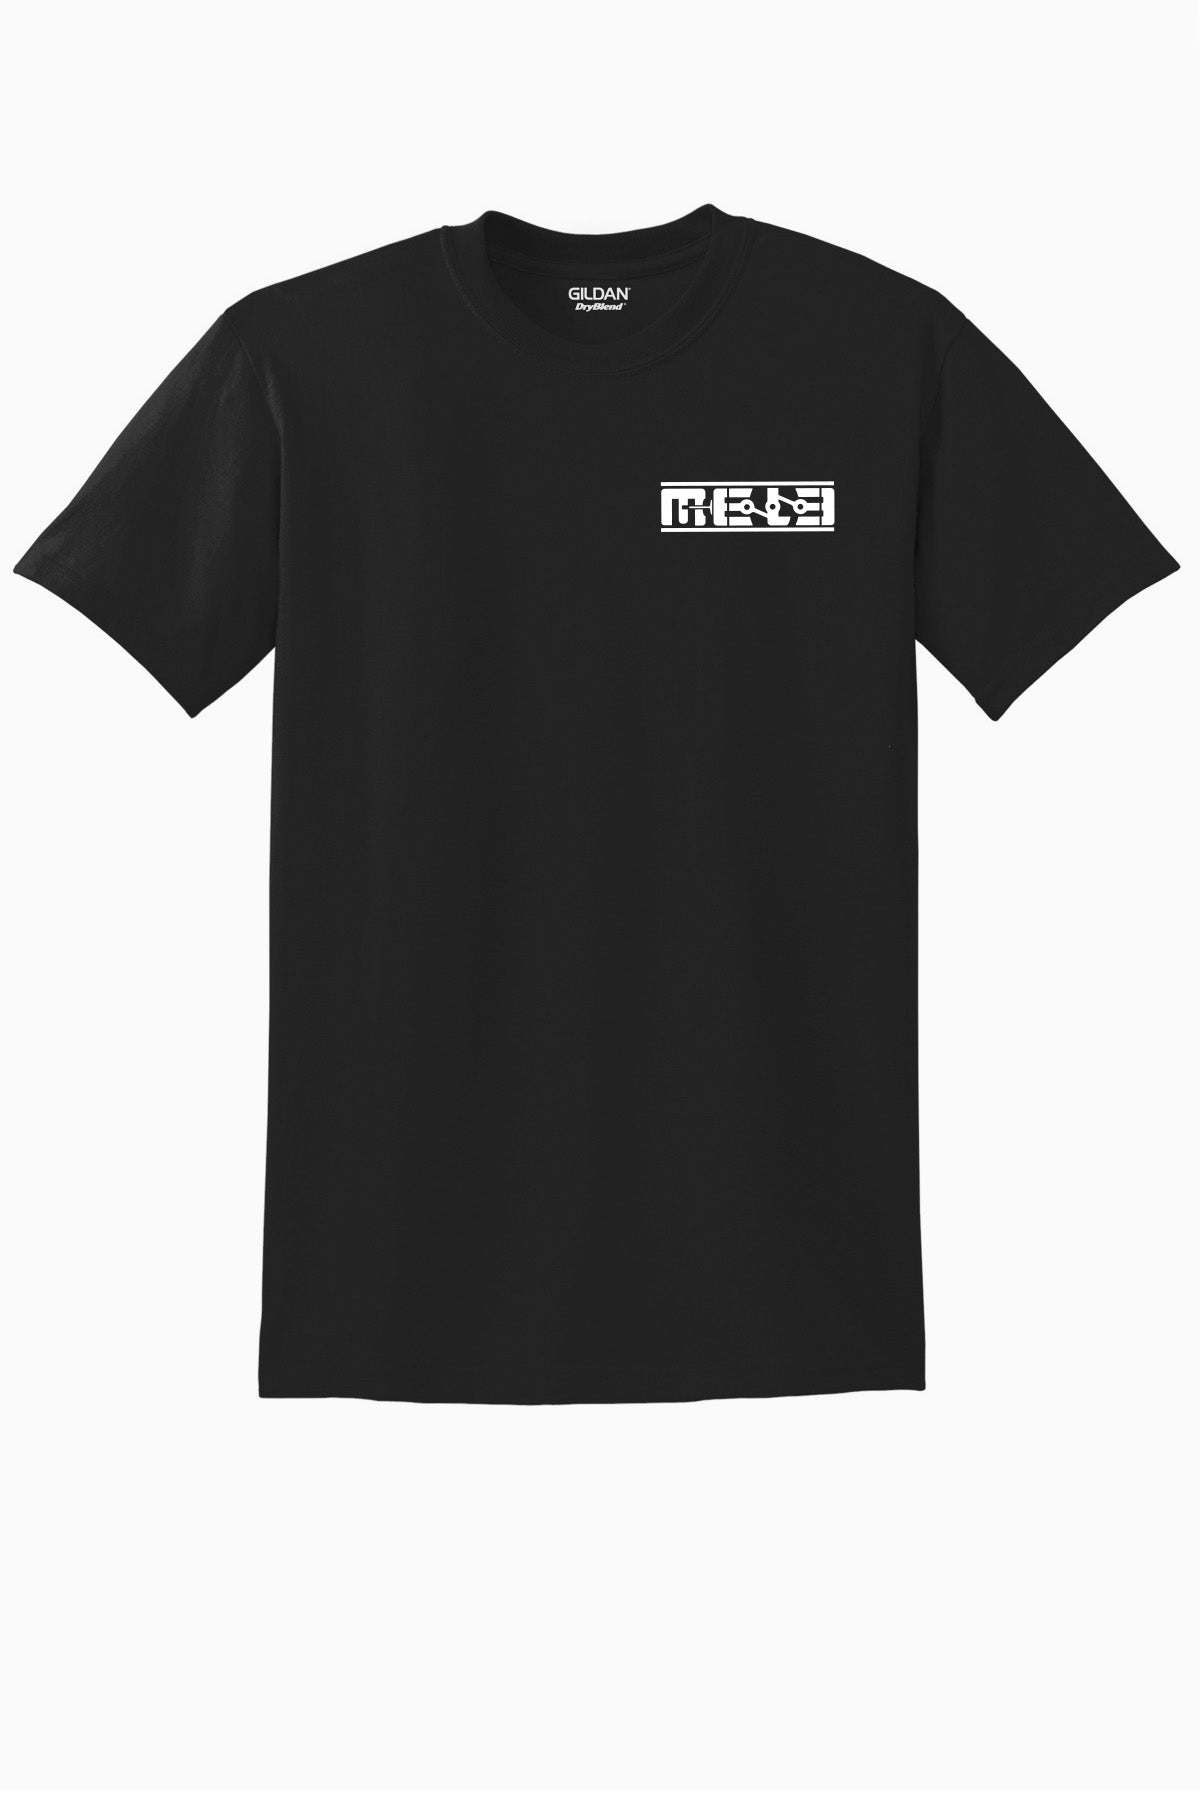 MeLe : Battery Mount Specialists Shirt